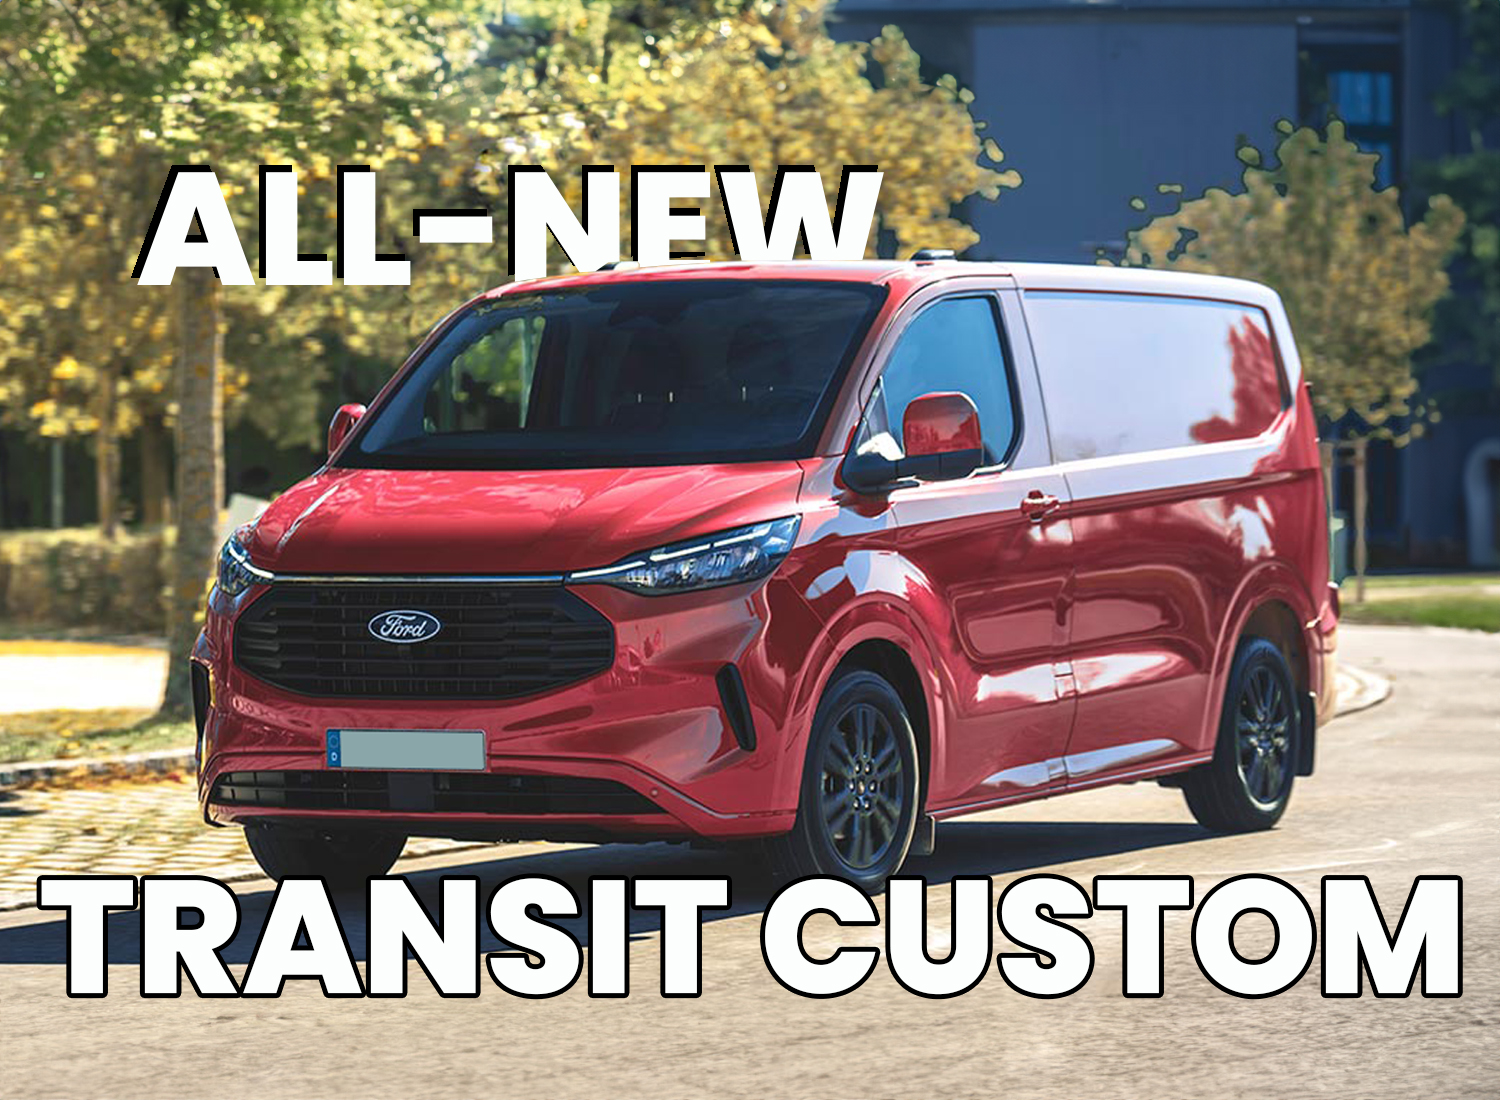 What can we expect from the all-new Transit Custom - Vanimal